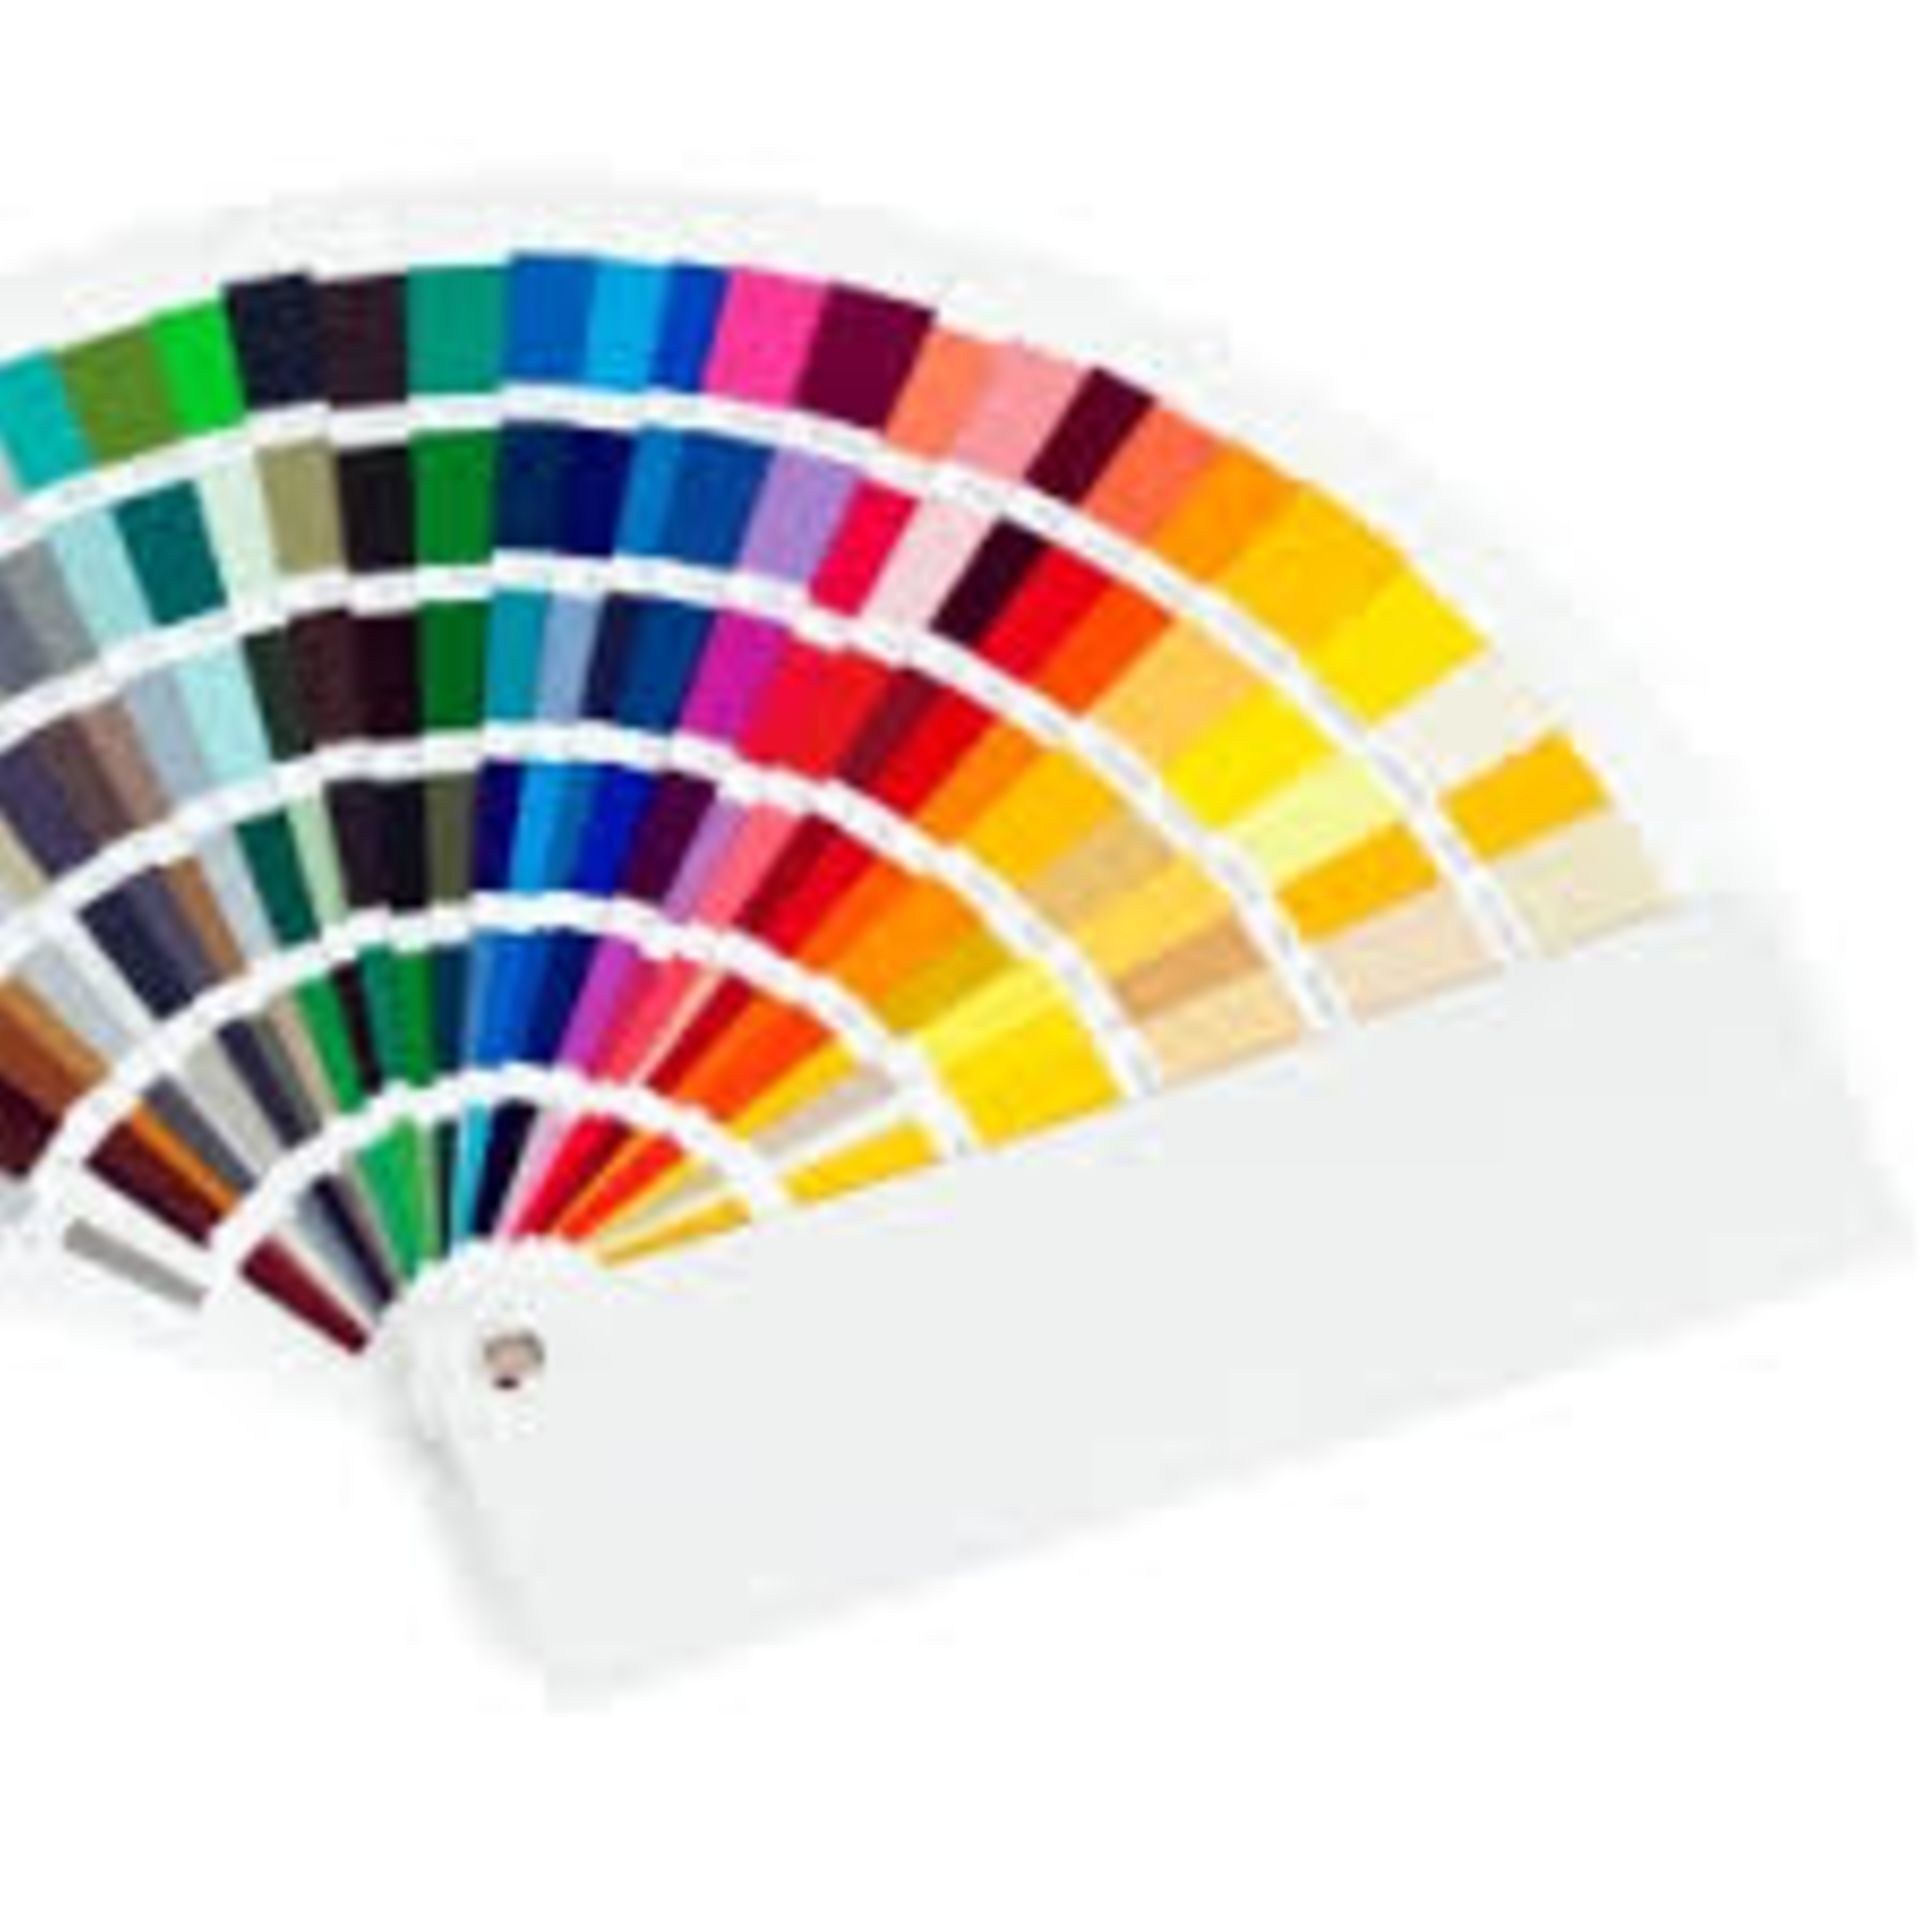 Color Therapy = The Popular Practice of Using Color to  Stimulate Positive Emotion and Improve Mental Health